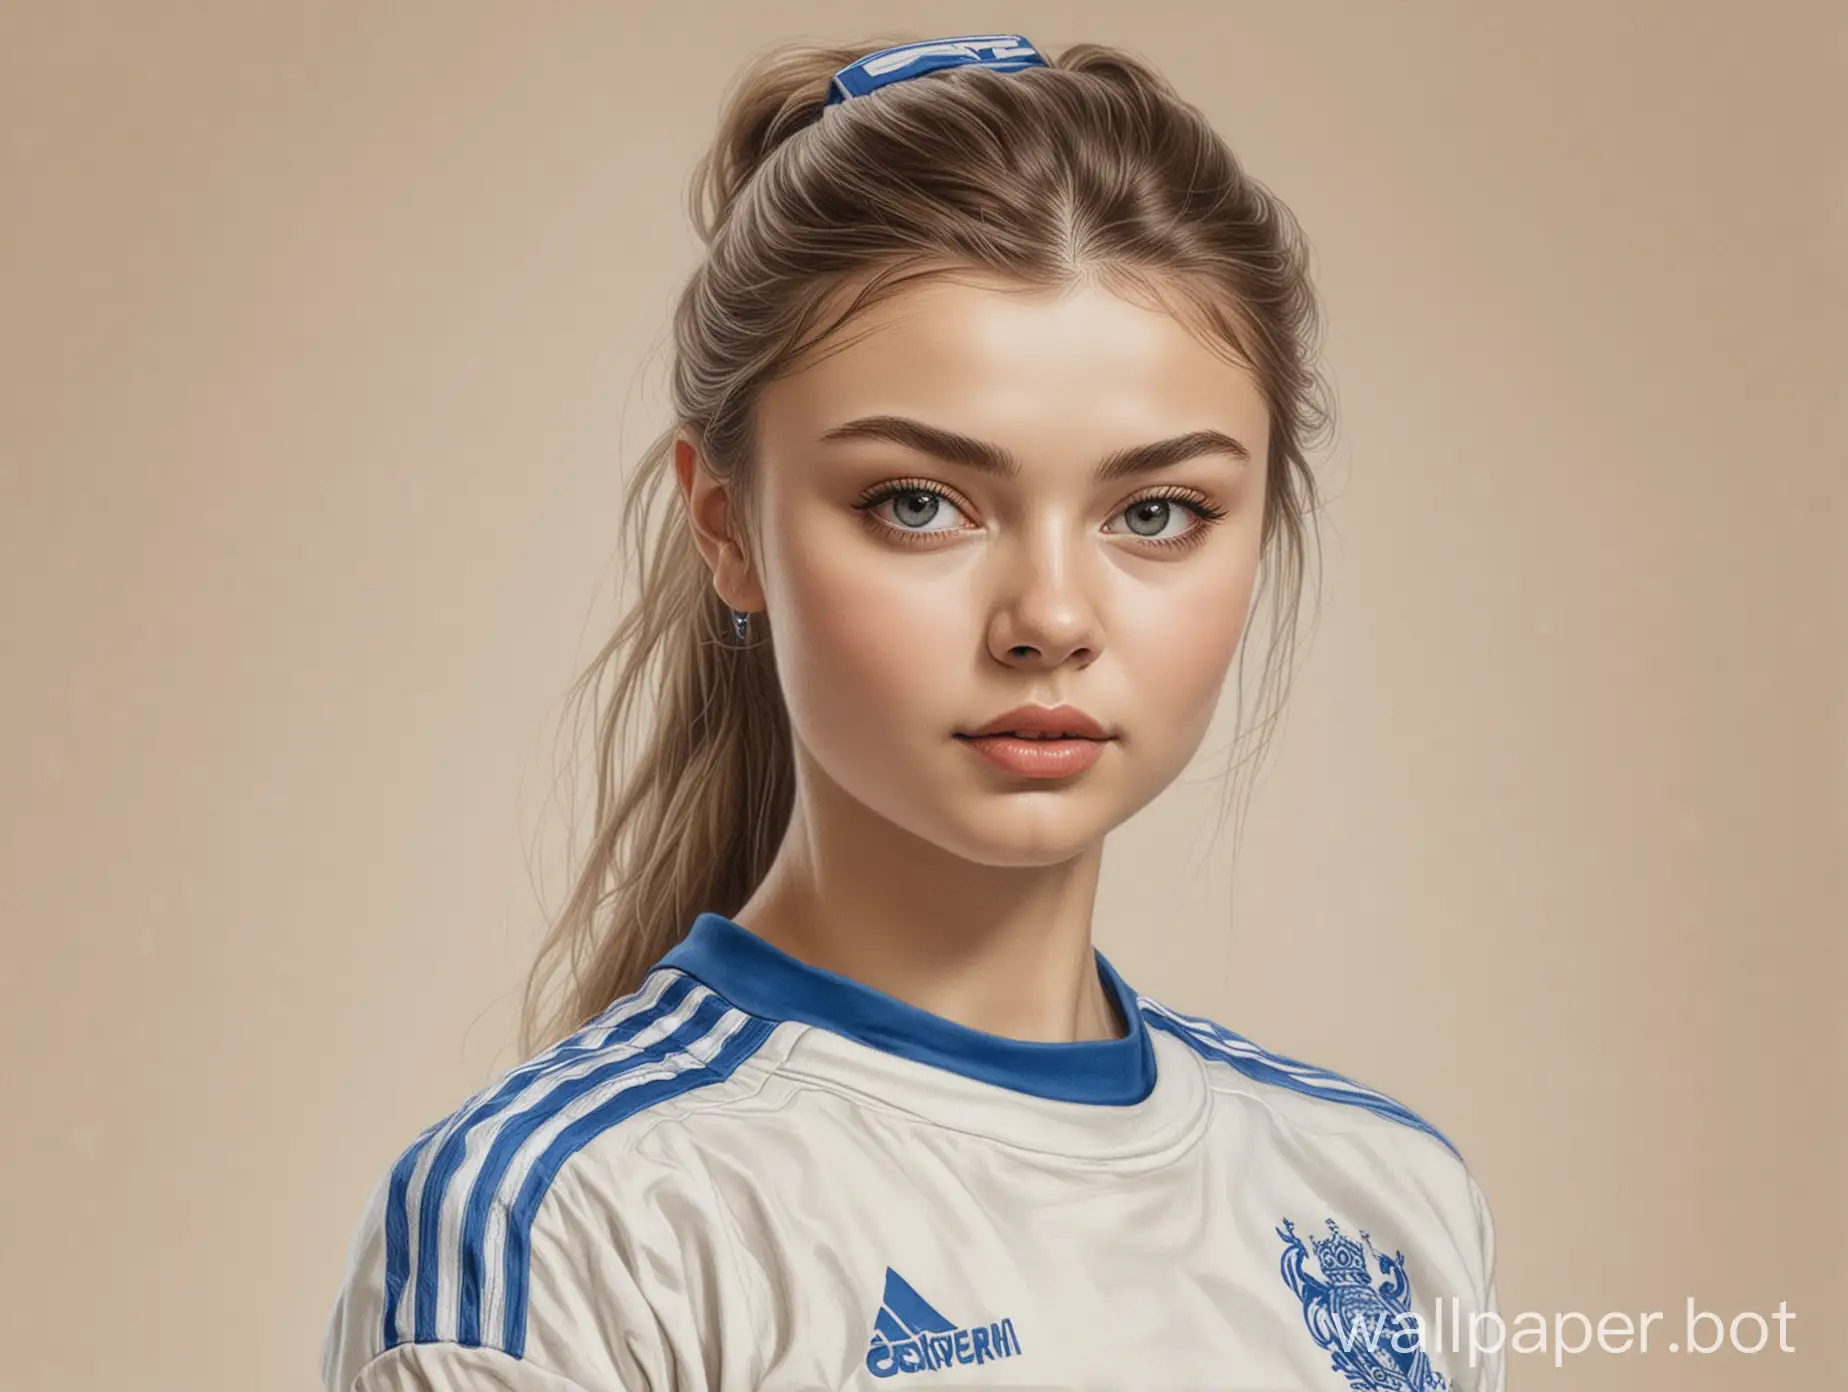 sketch young Alina Kabaeva 20 years old 4 breast size narrow waist In light-beige-blue soccer uniform white background high realism pencil drawing portrait in three-quarters style modern